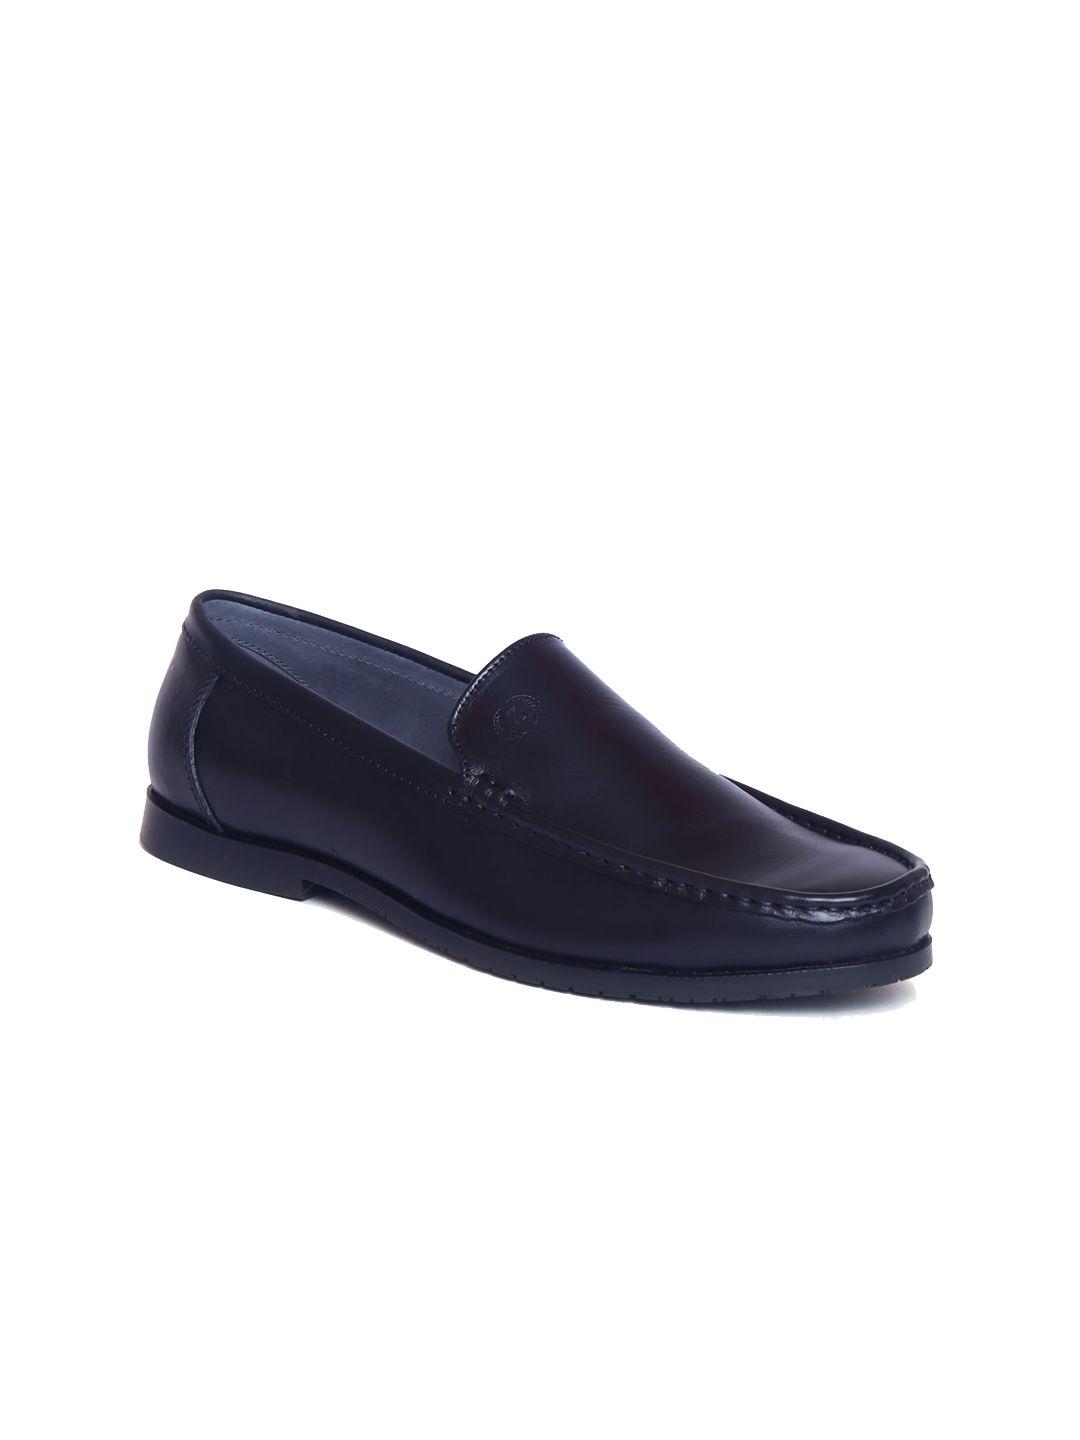 zoom shoes men lightweight leather loafers